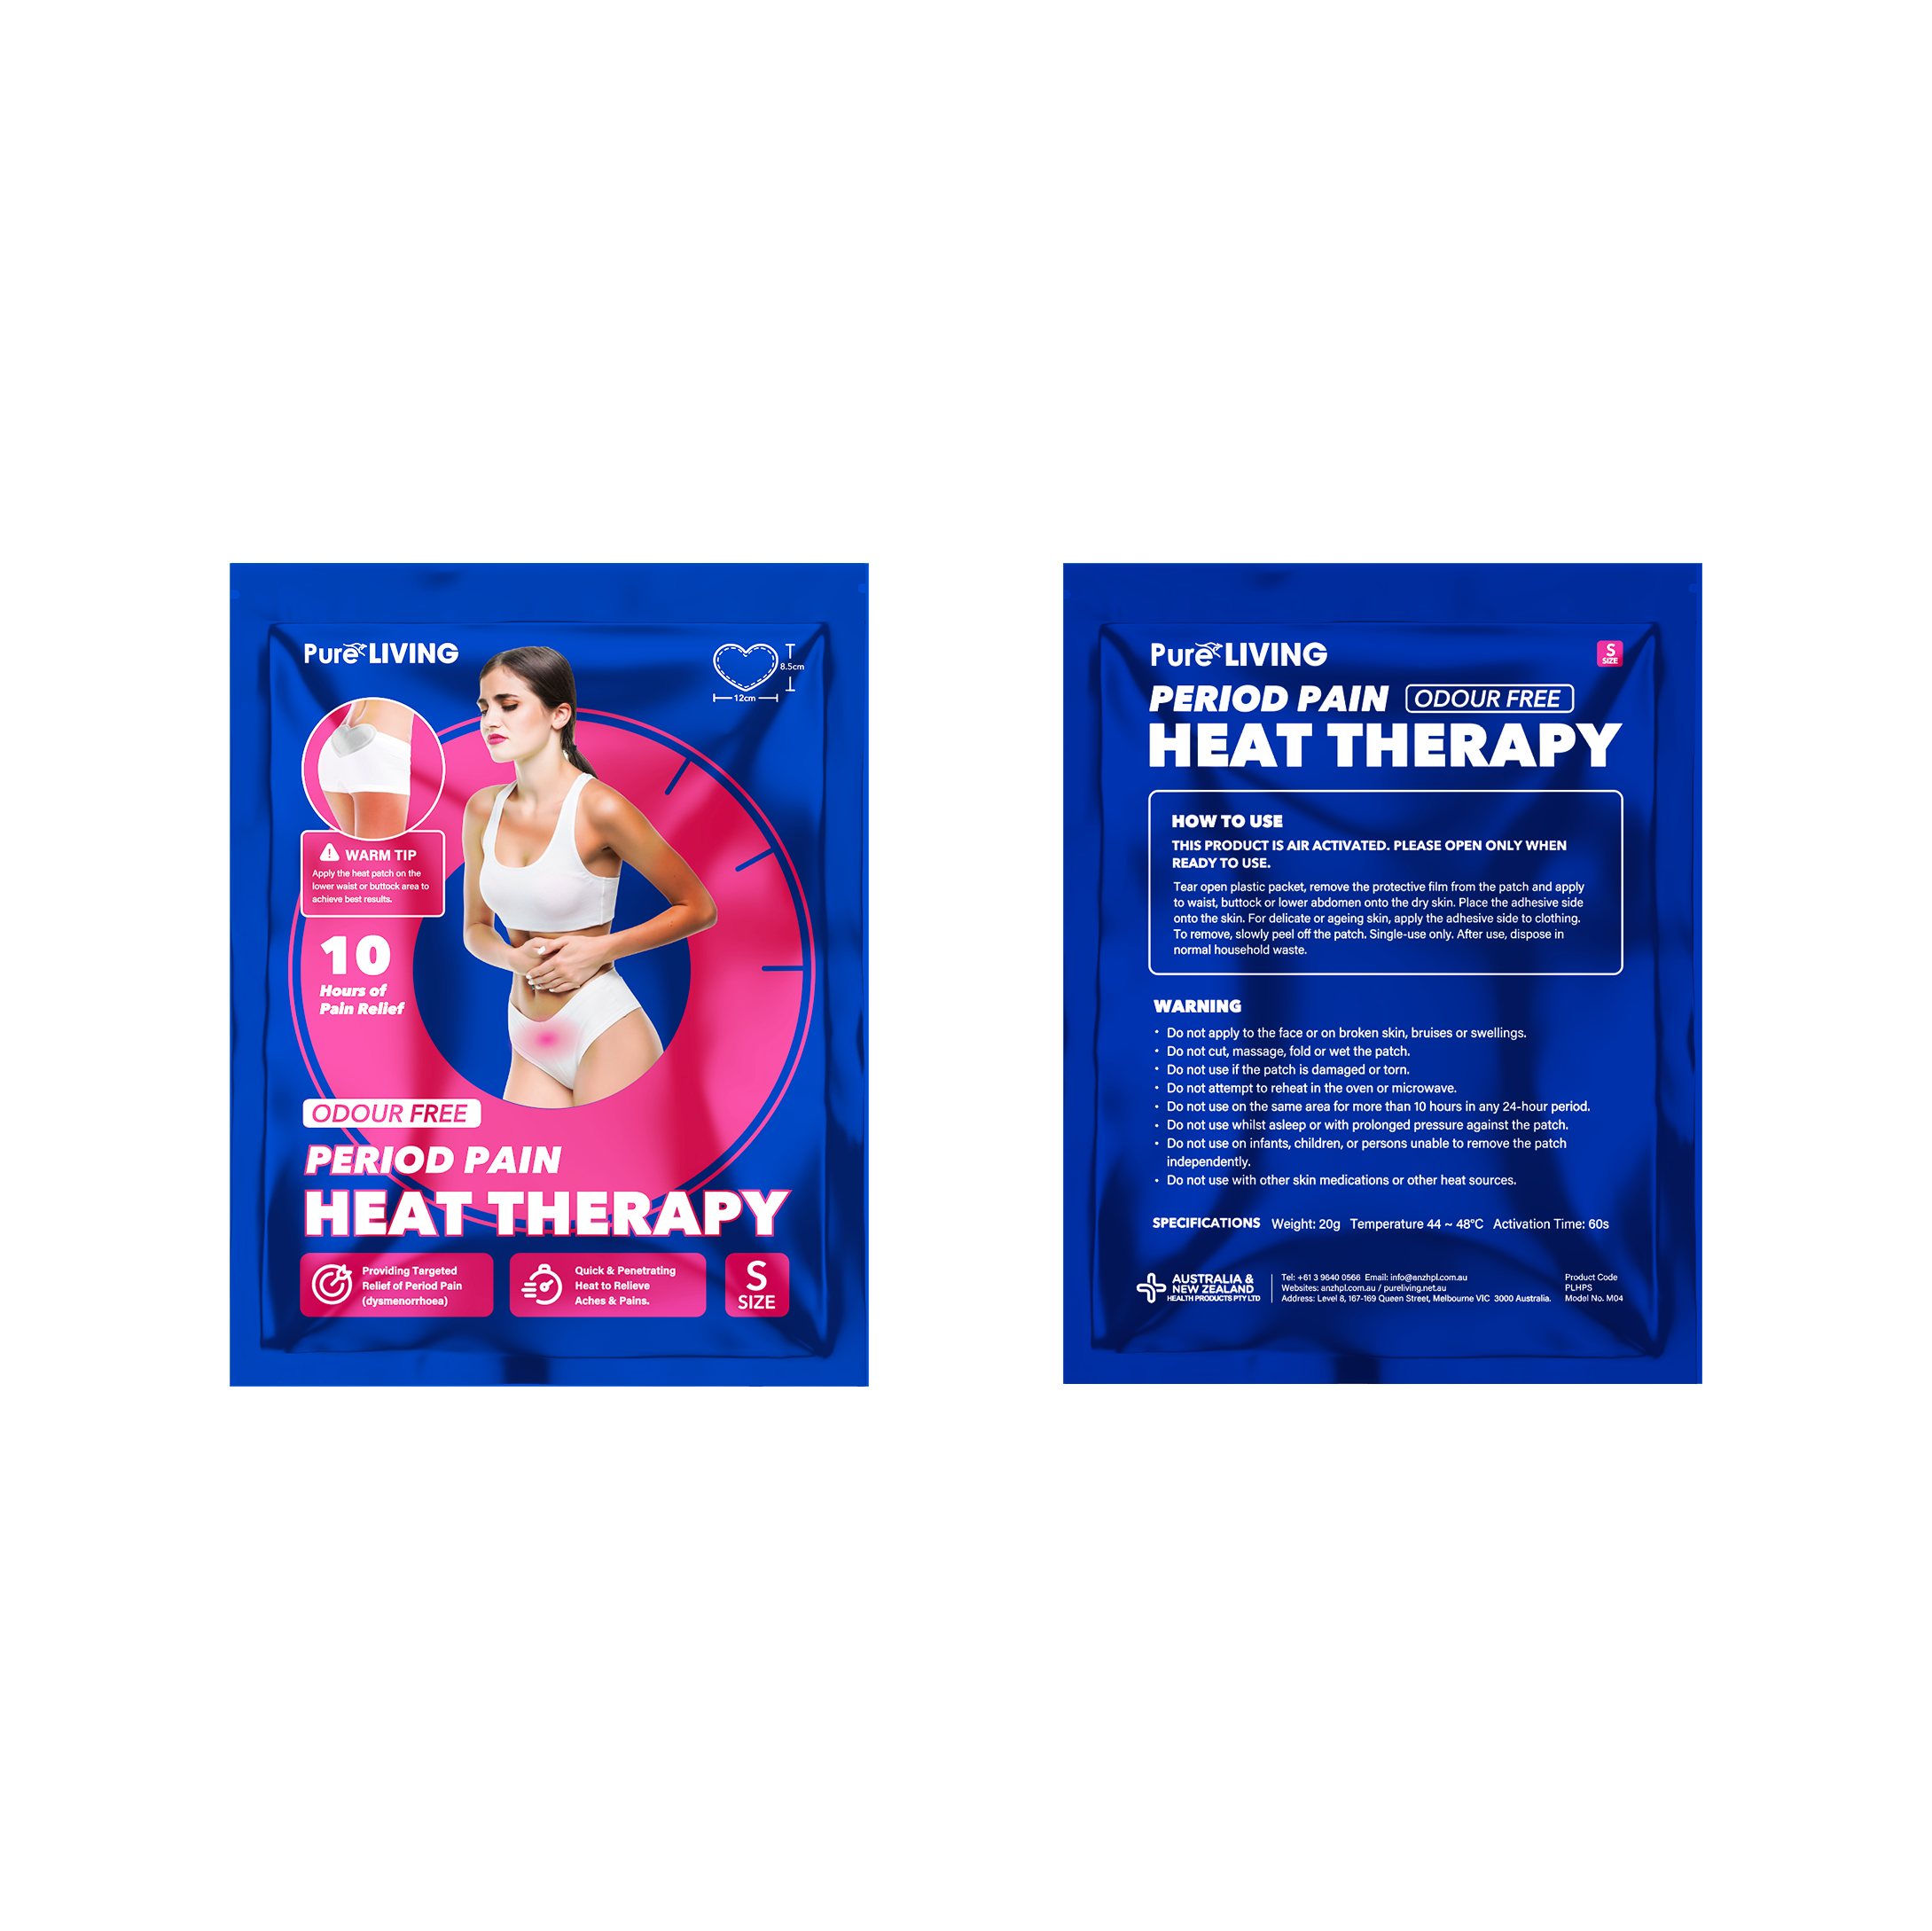 Period Pain Heat Therapy 3pc